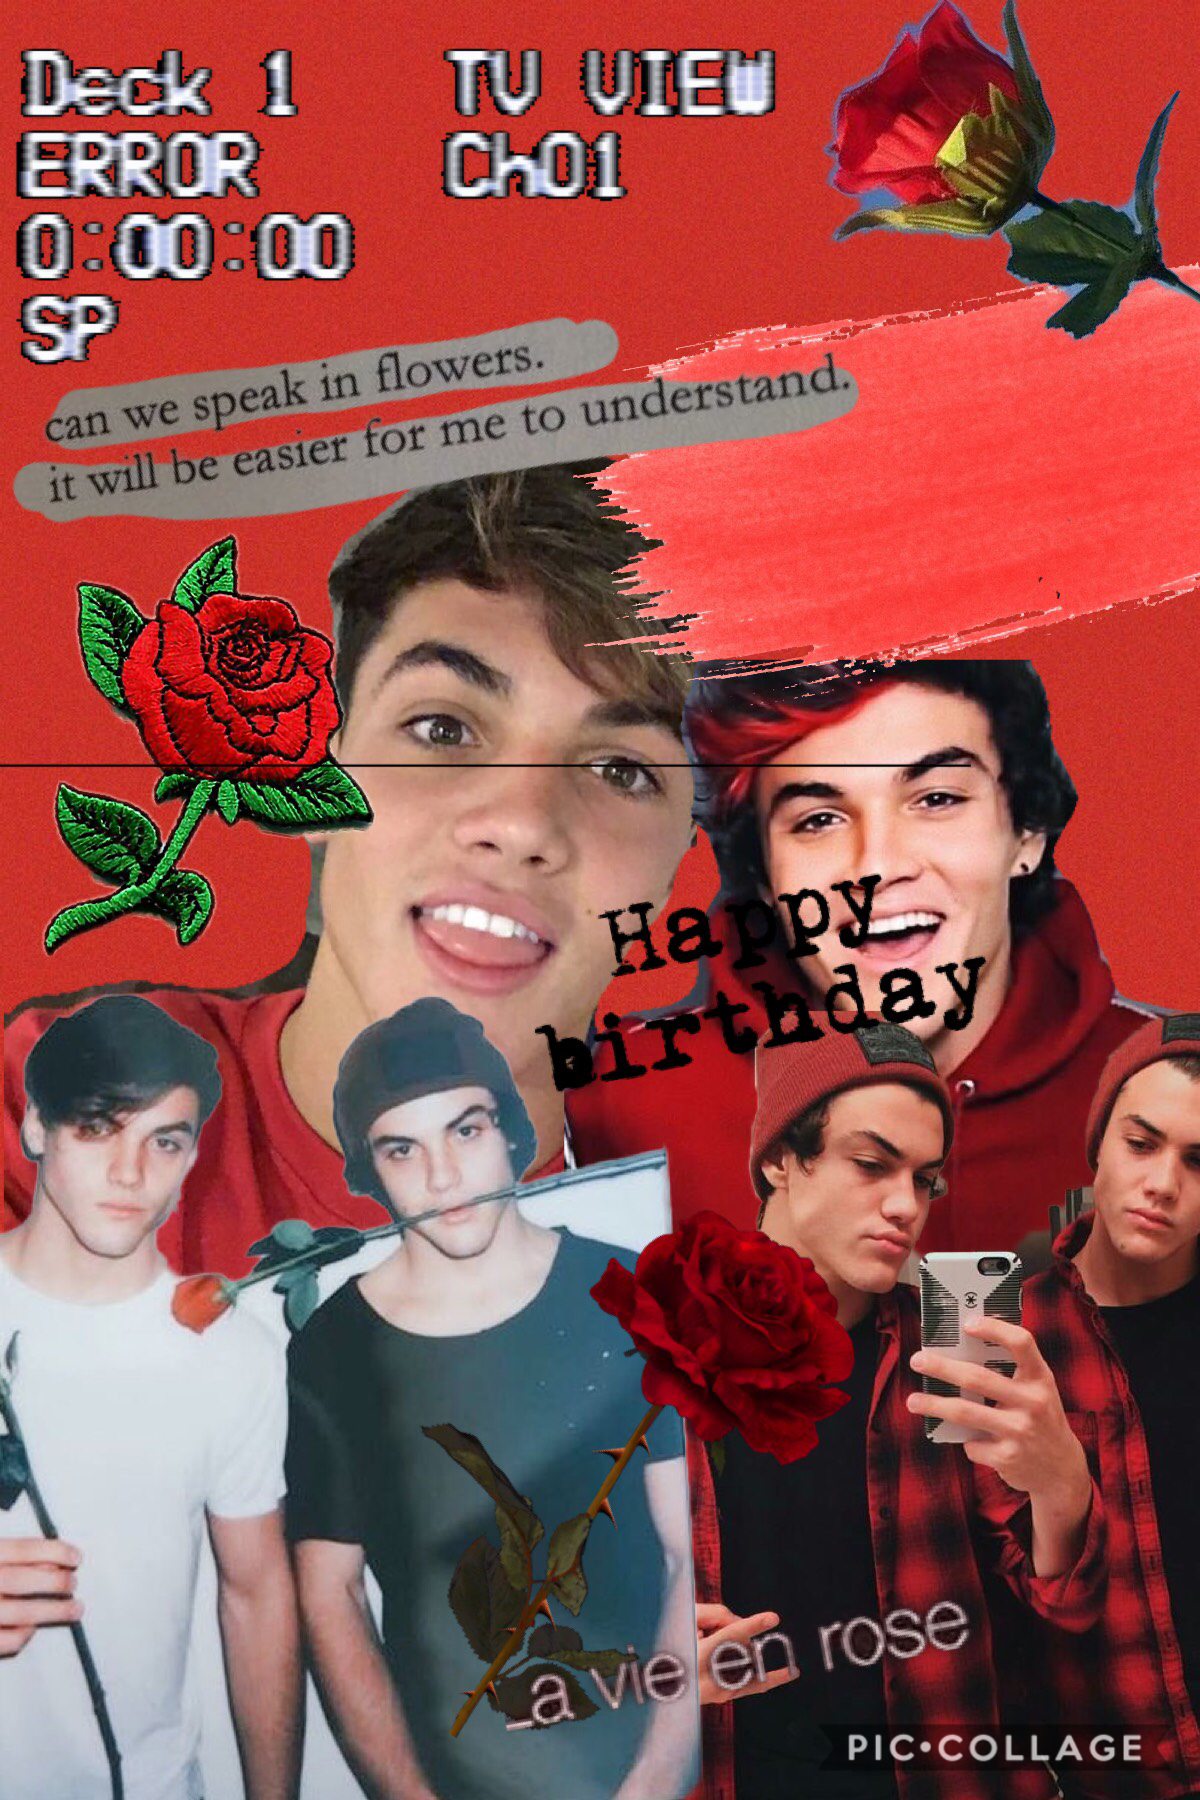 Happy birthday to the Dolan twins! I know their birthday was yesterday but I didn’t have time to finish the edit. I love you guys so much. Everytime you post a video it makes me smile.